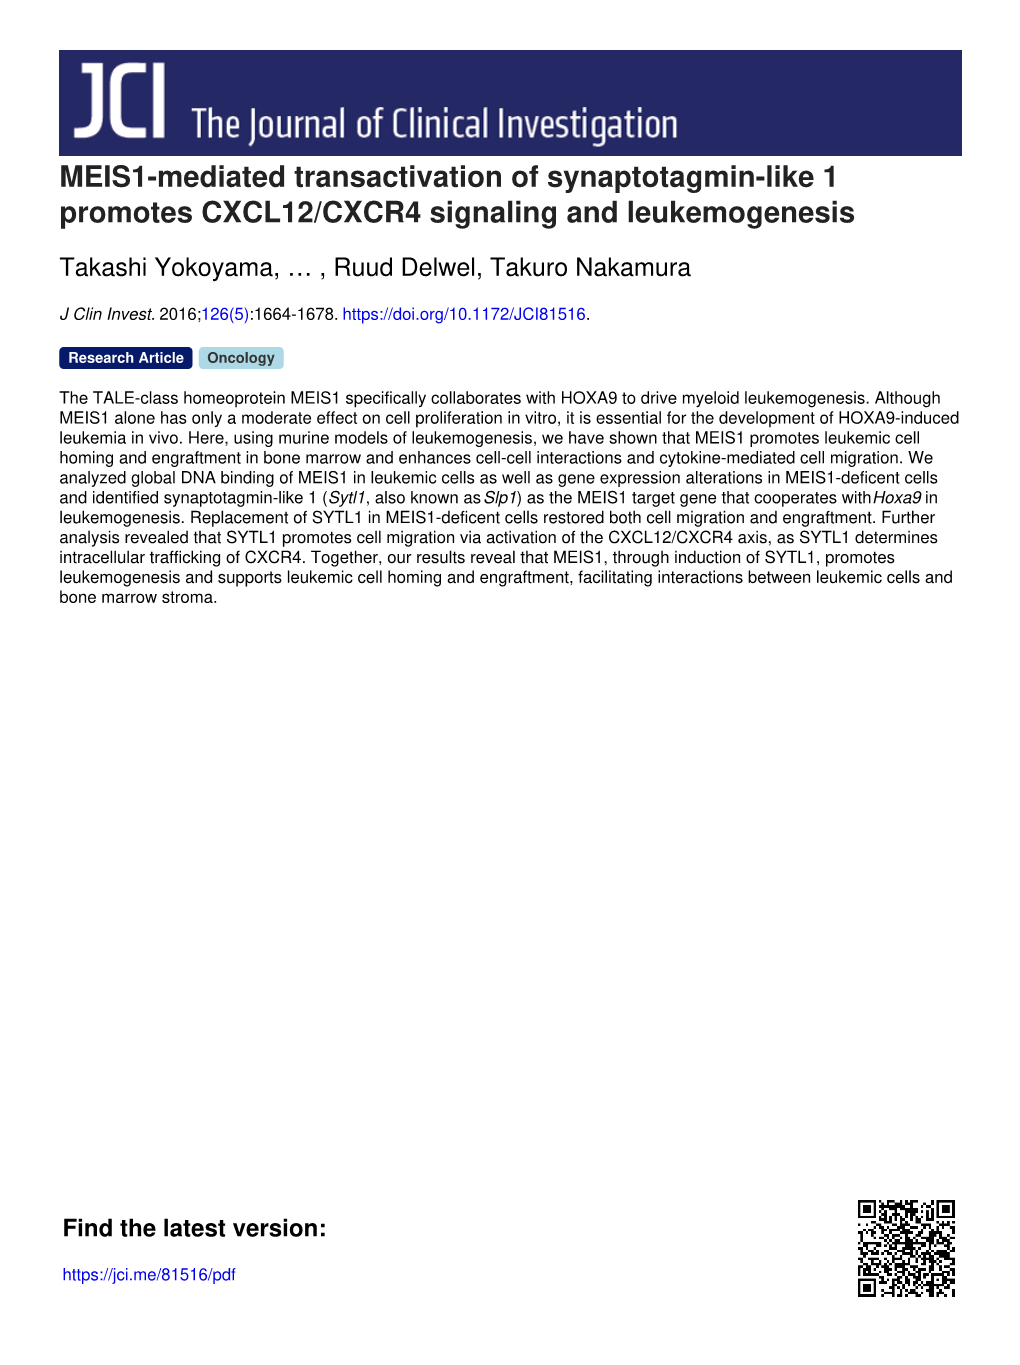 MEIS1-Mediated Transactivation of Synaptotagmin-Like 1 Promotes CXCL12/CXCR4 Signaling and Leukemogenesis